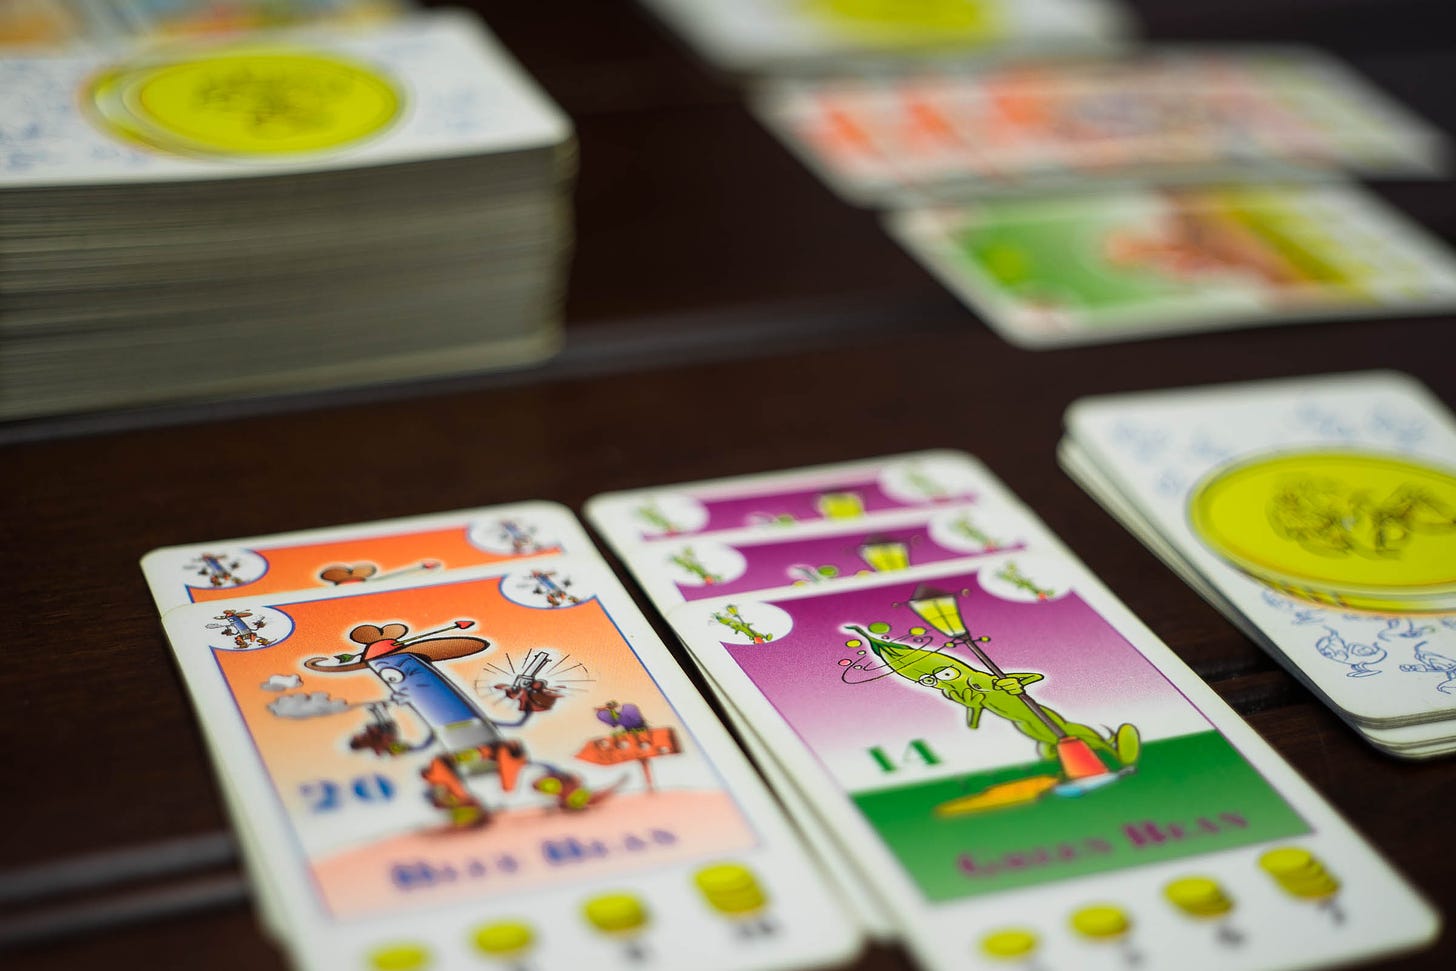 Cards from the game Bohnanza on a table. There are two planted fields, one with Blue Beans and one with Green Beans.